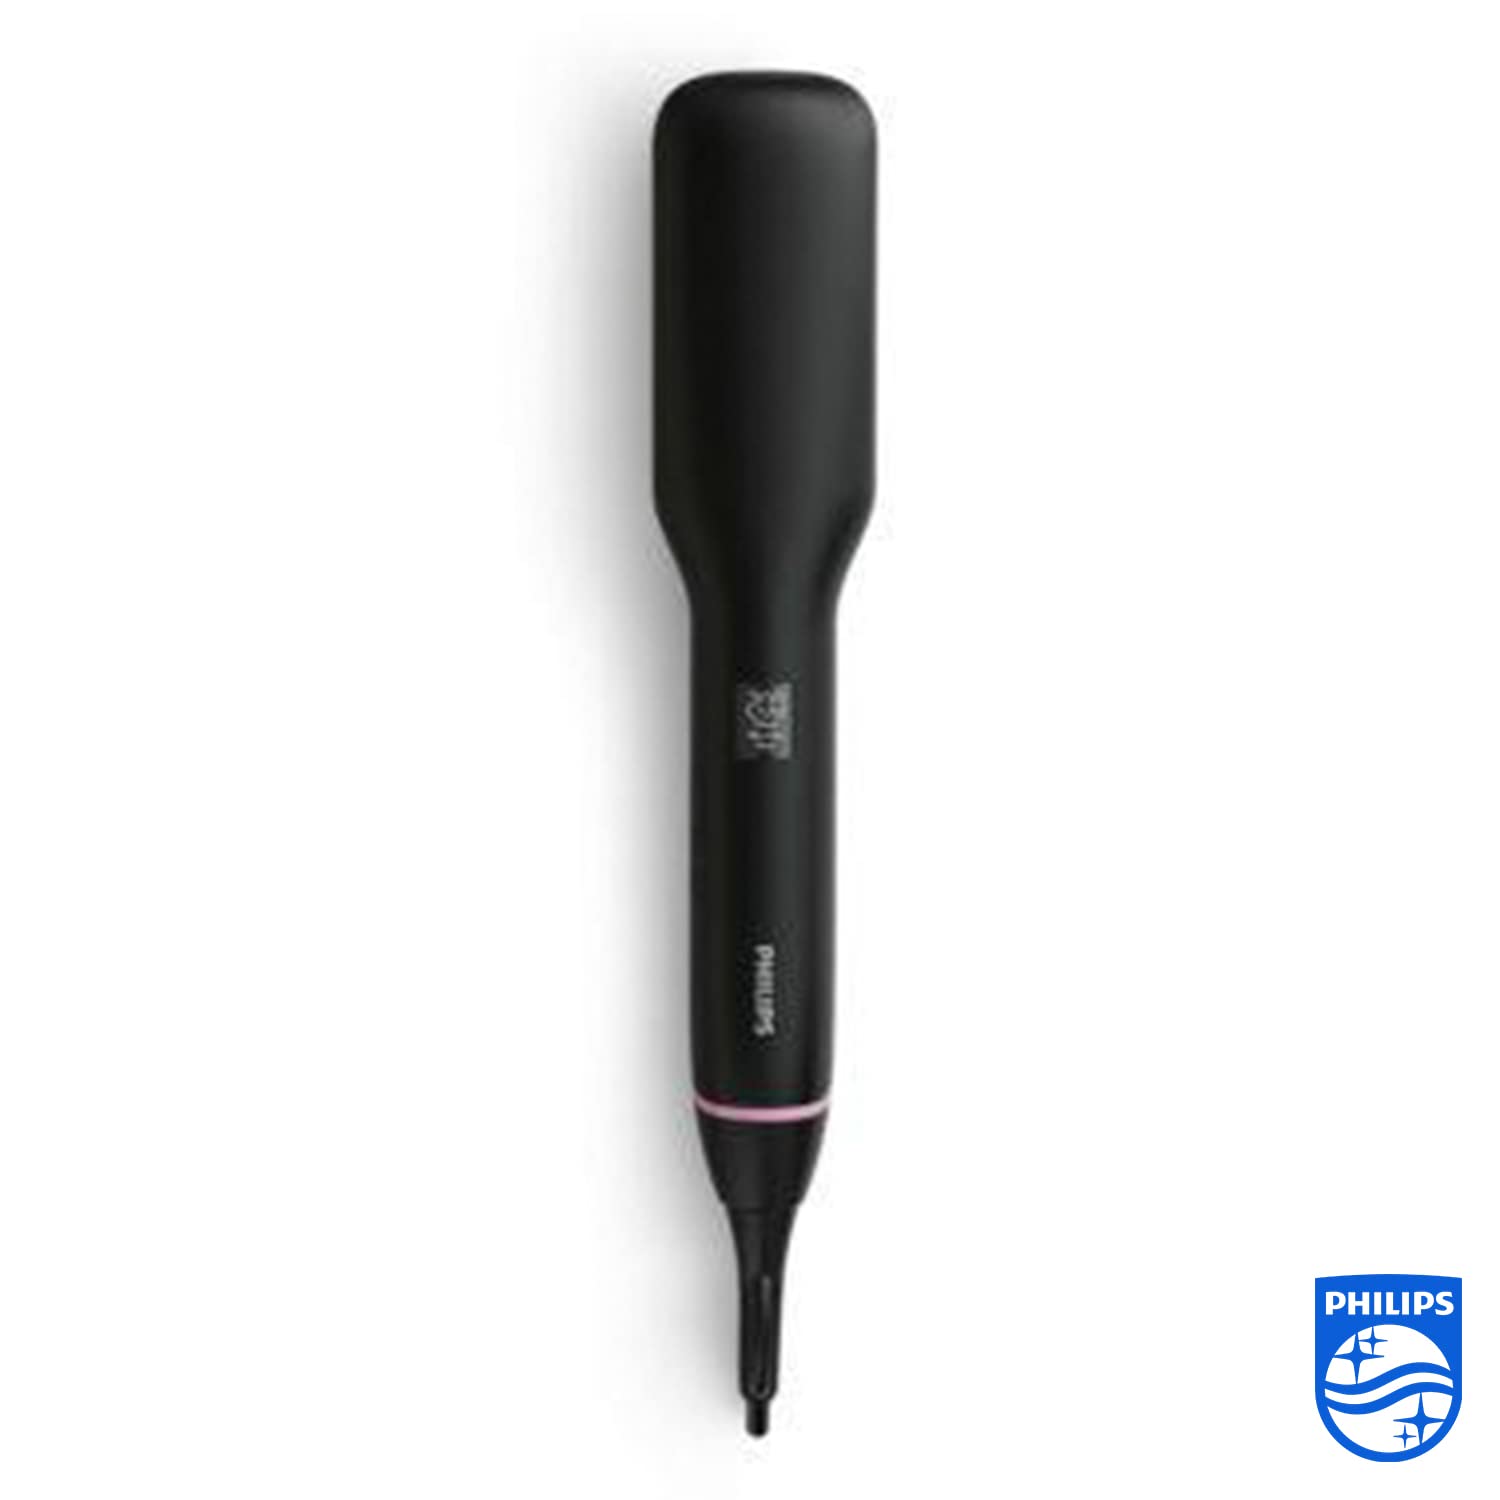 Philips Straight Care Vivid Ends Straightener in Bahrain - Halabh